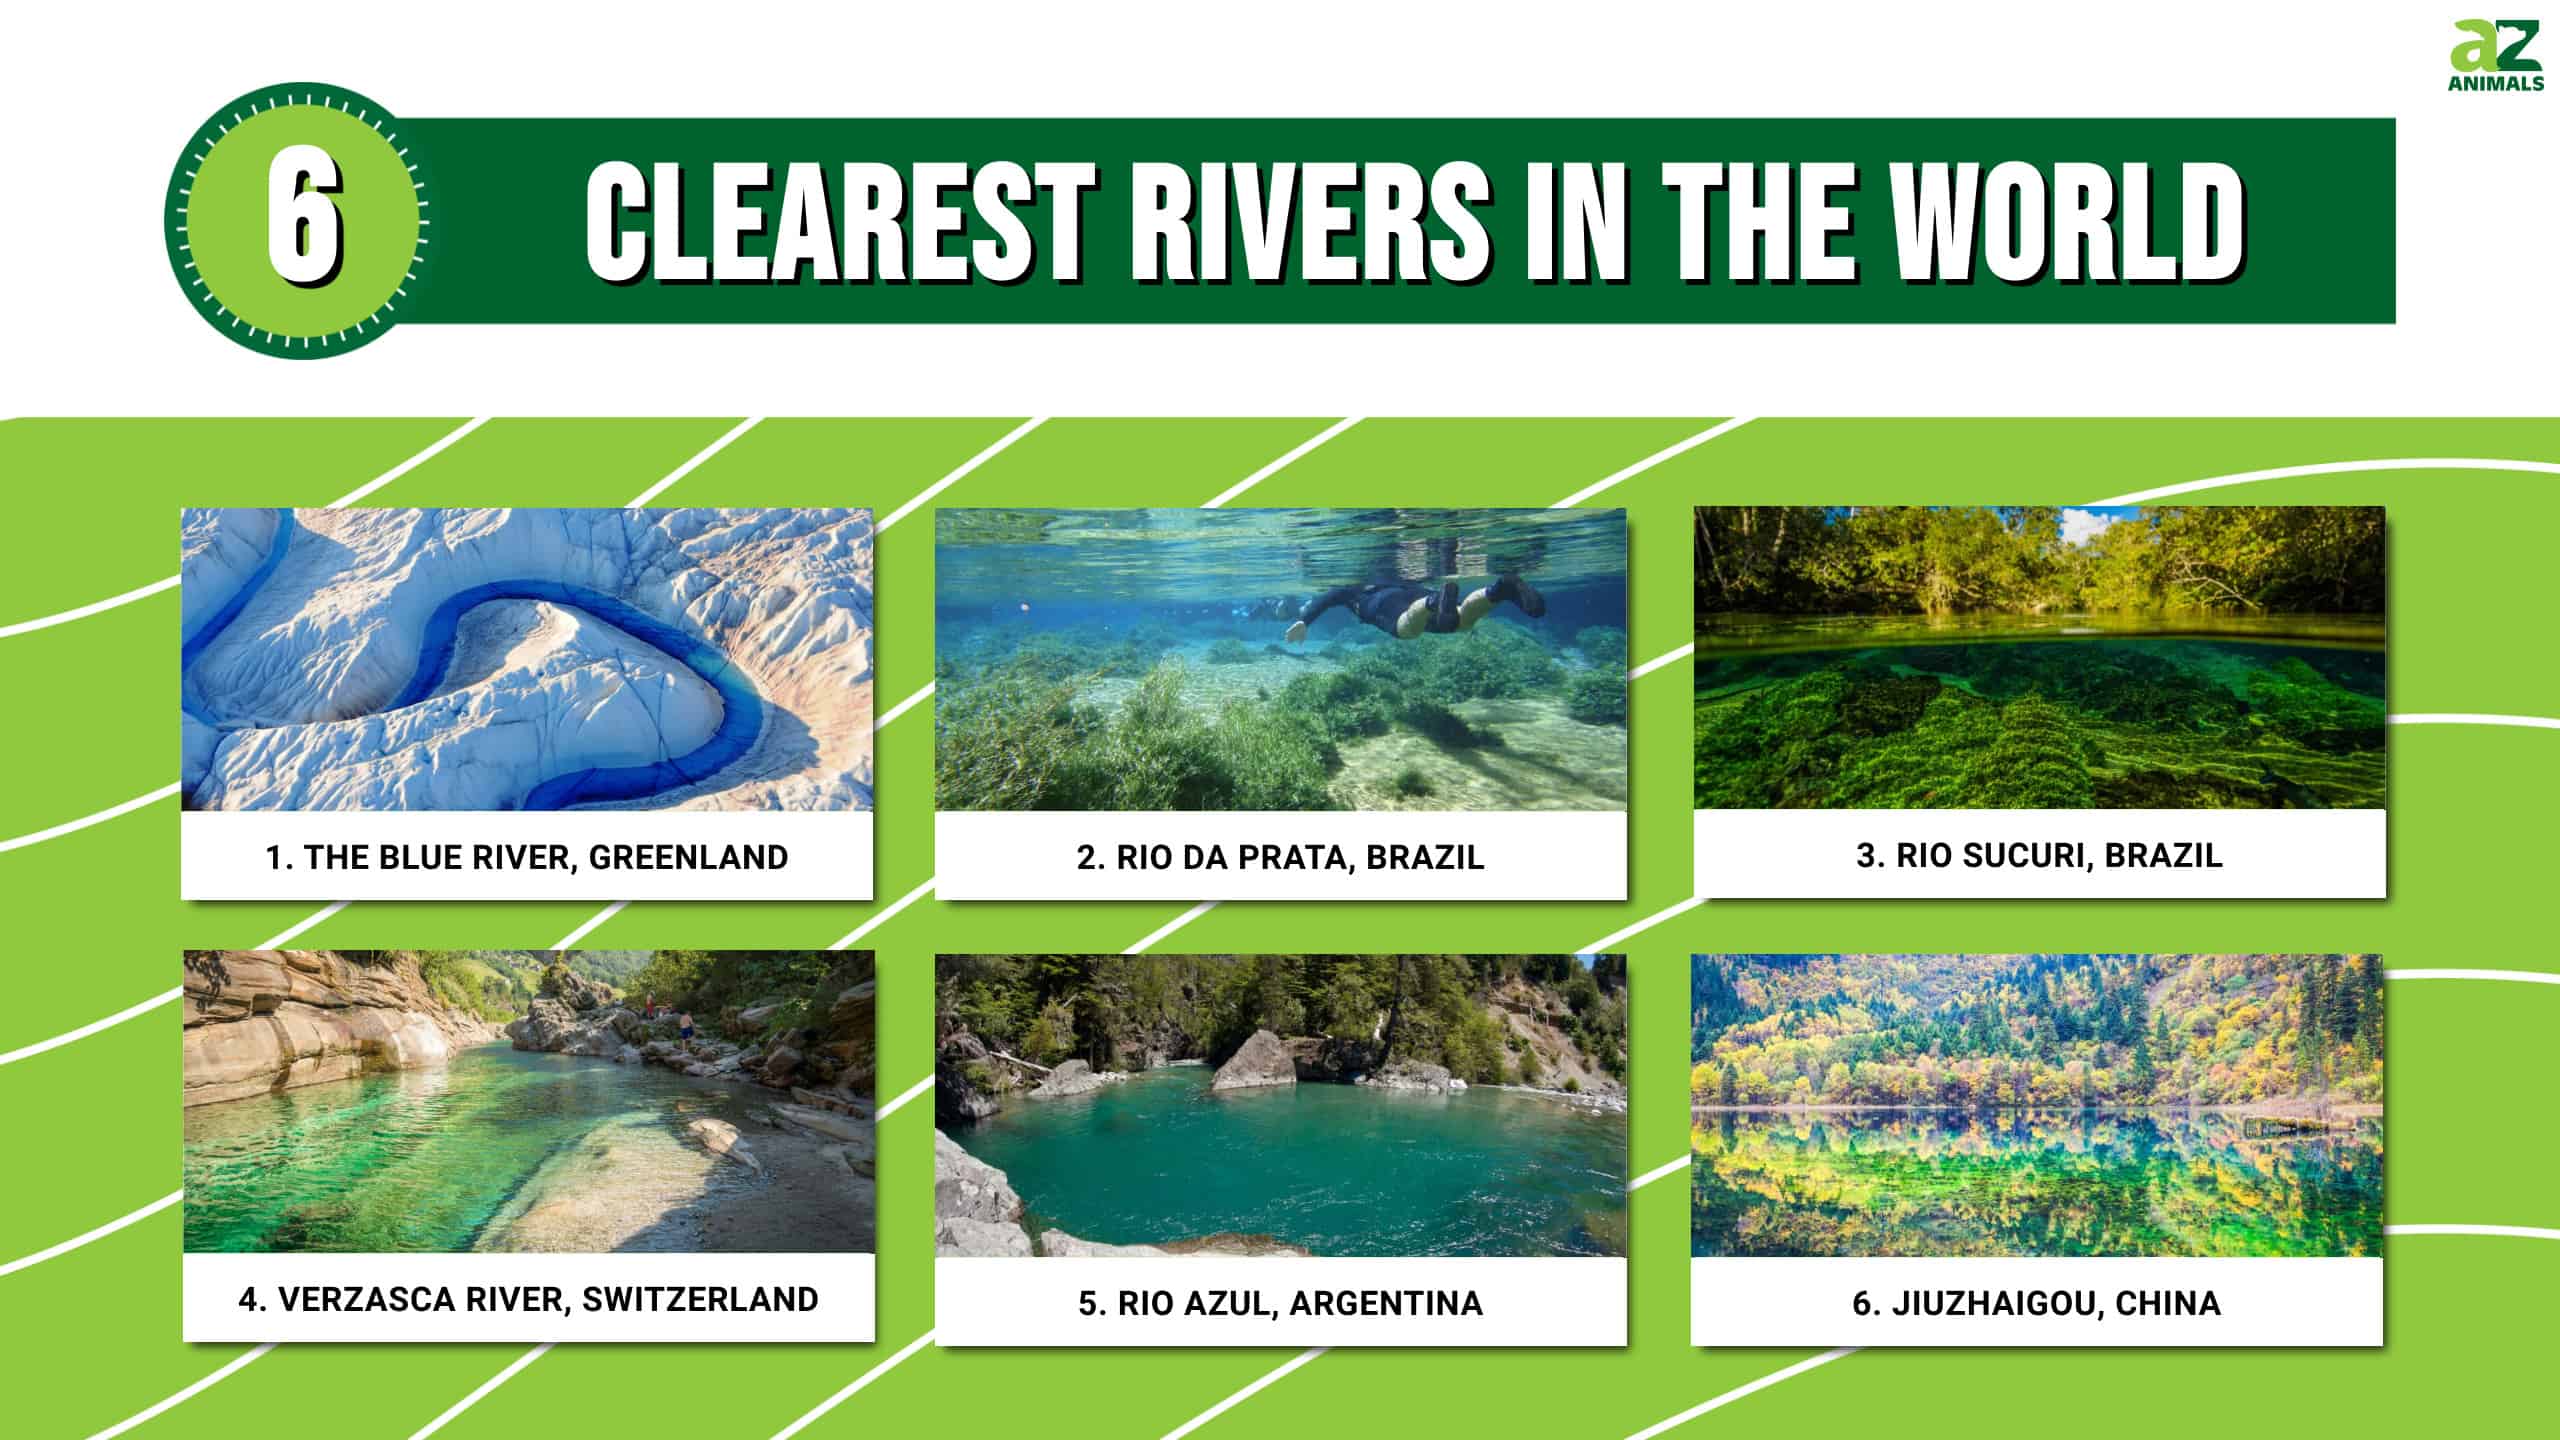 The cleanest river in Asia with its crystal clear water